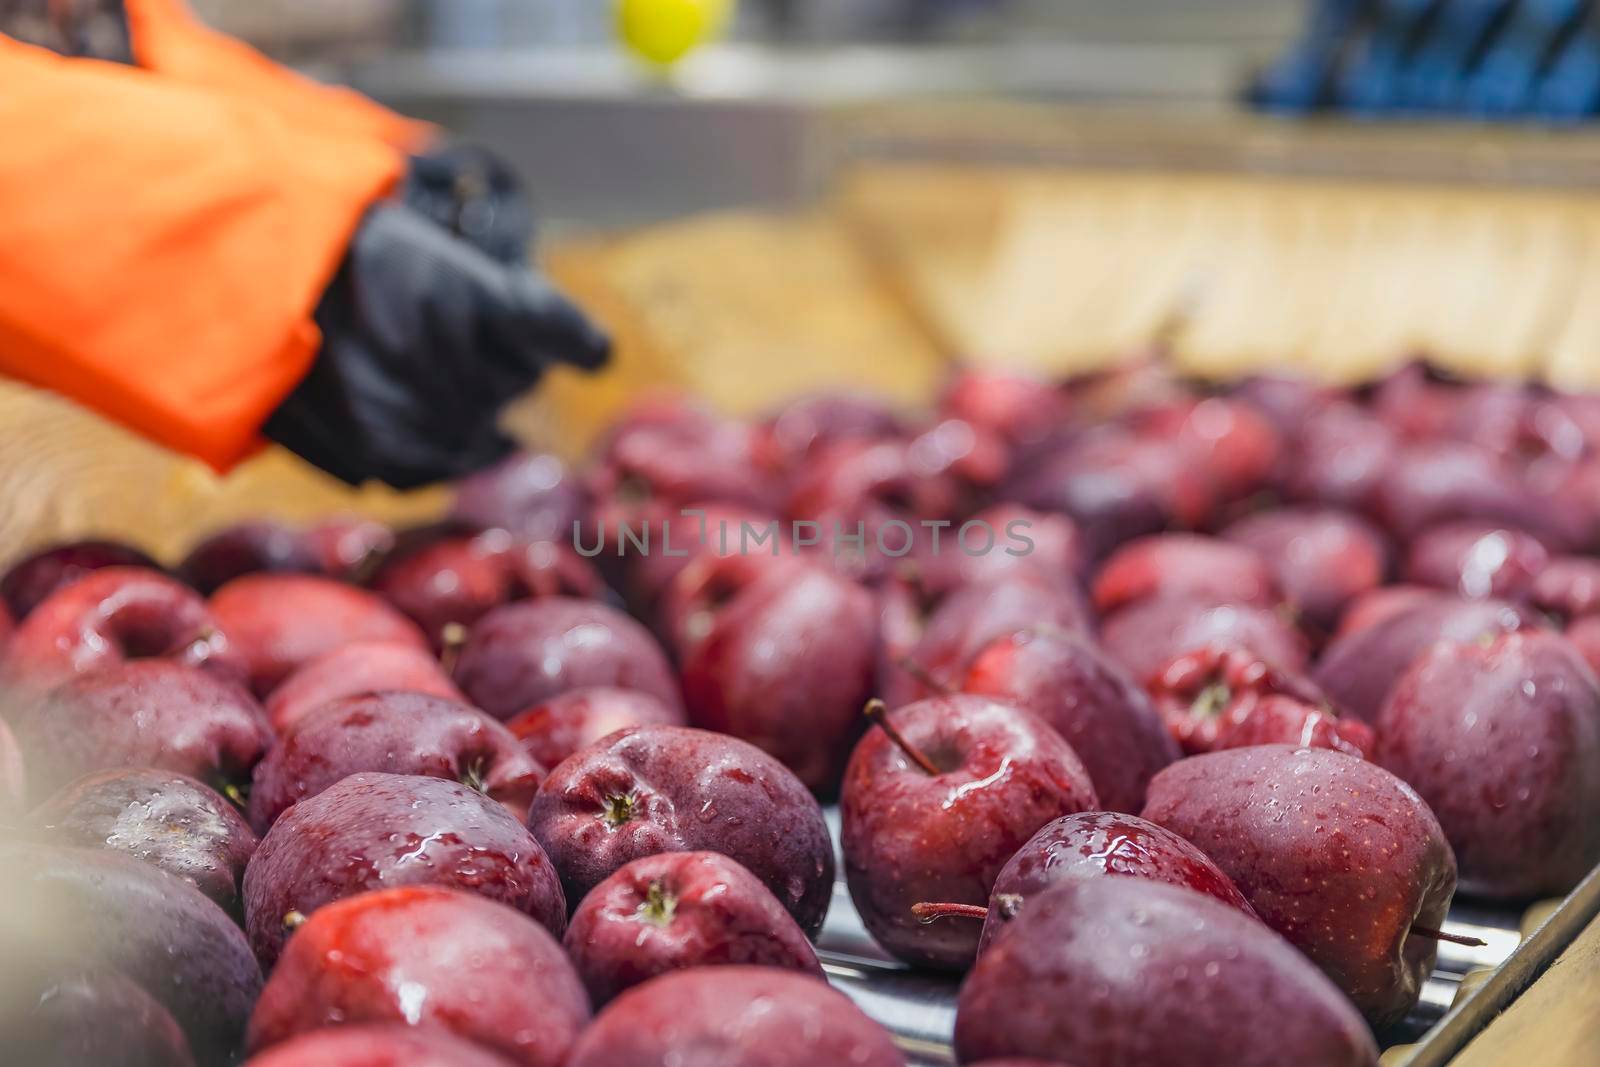 quality control of apples at the factory by zokov